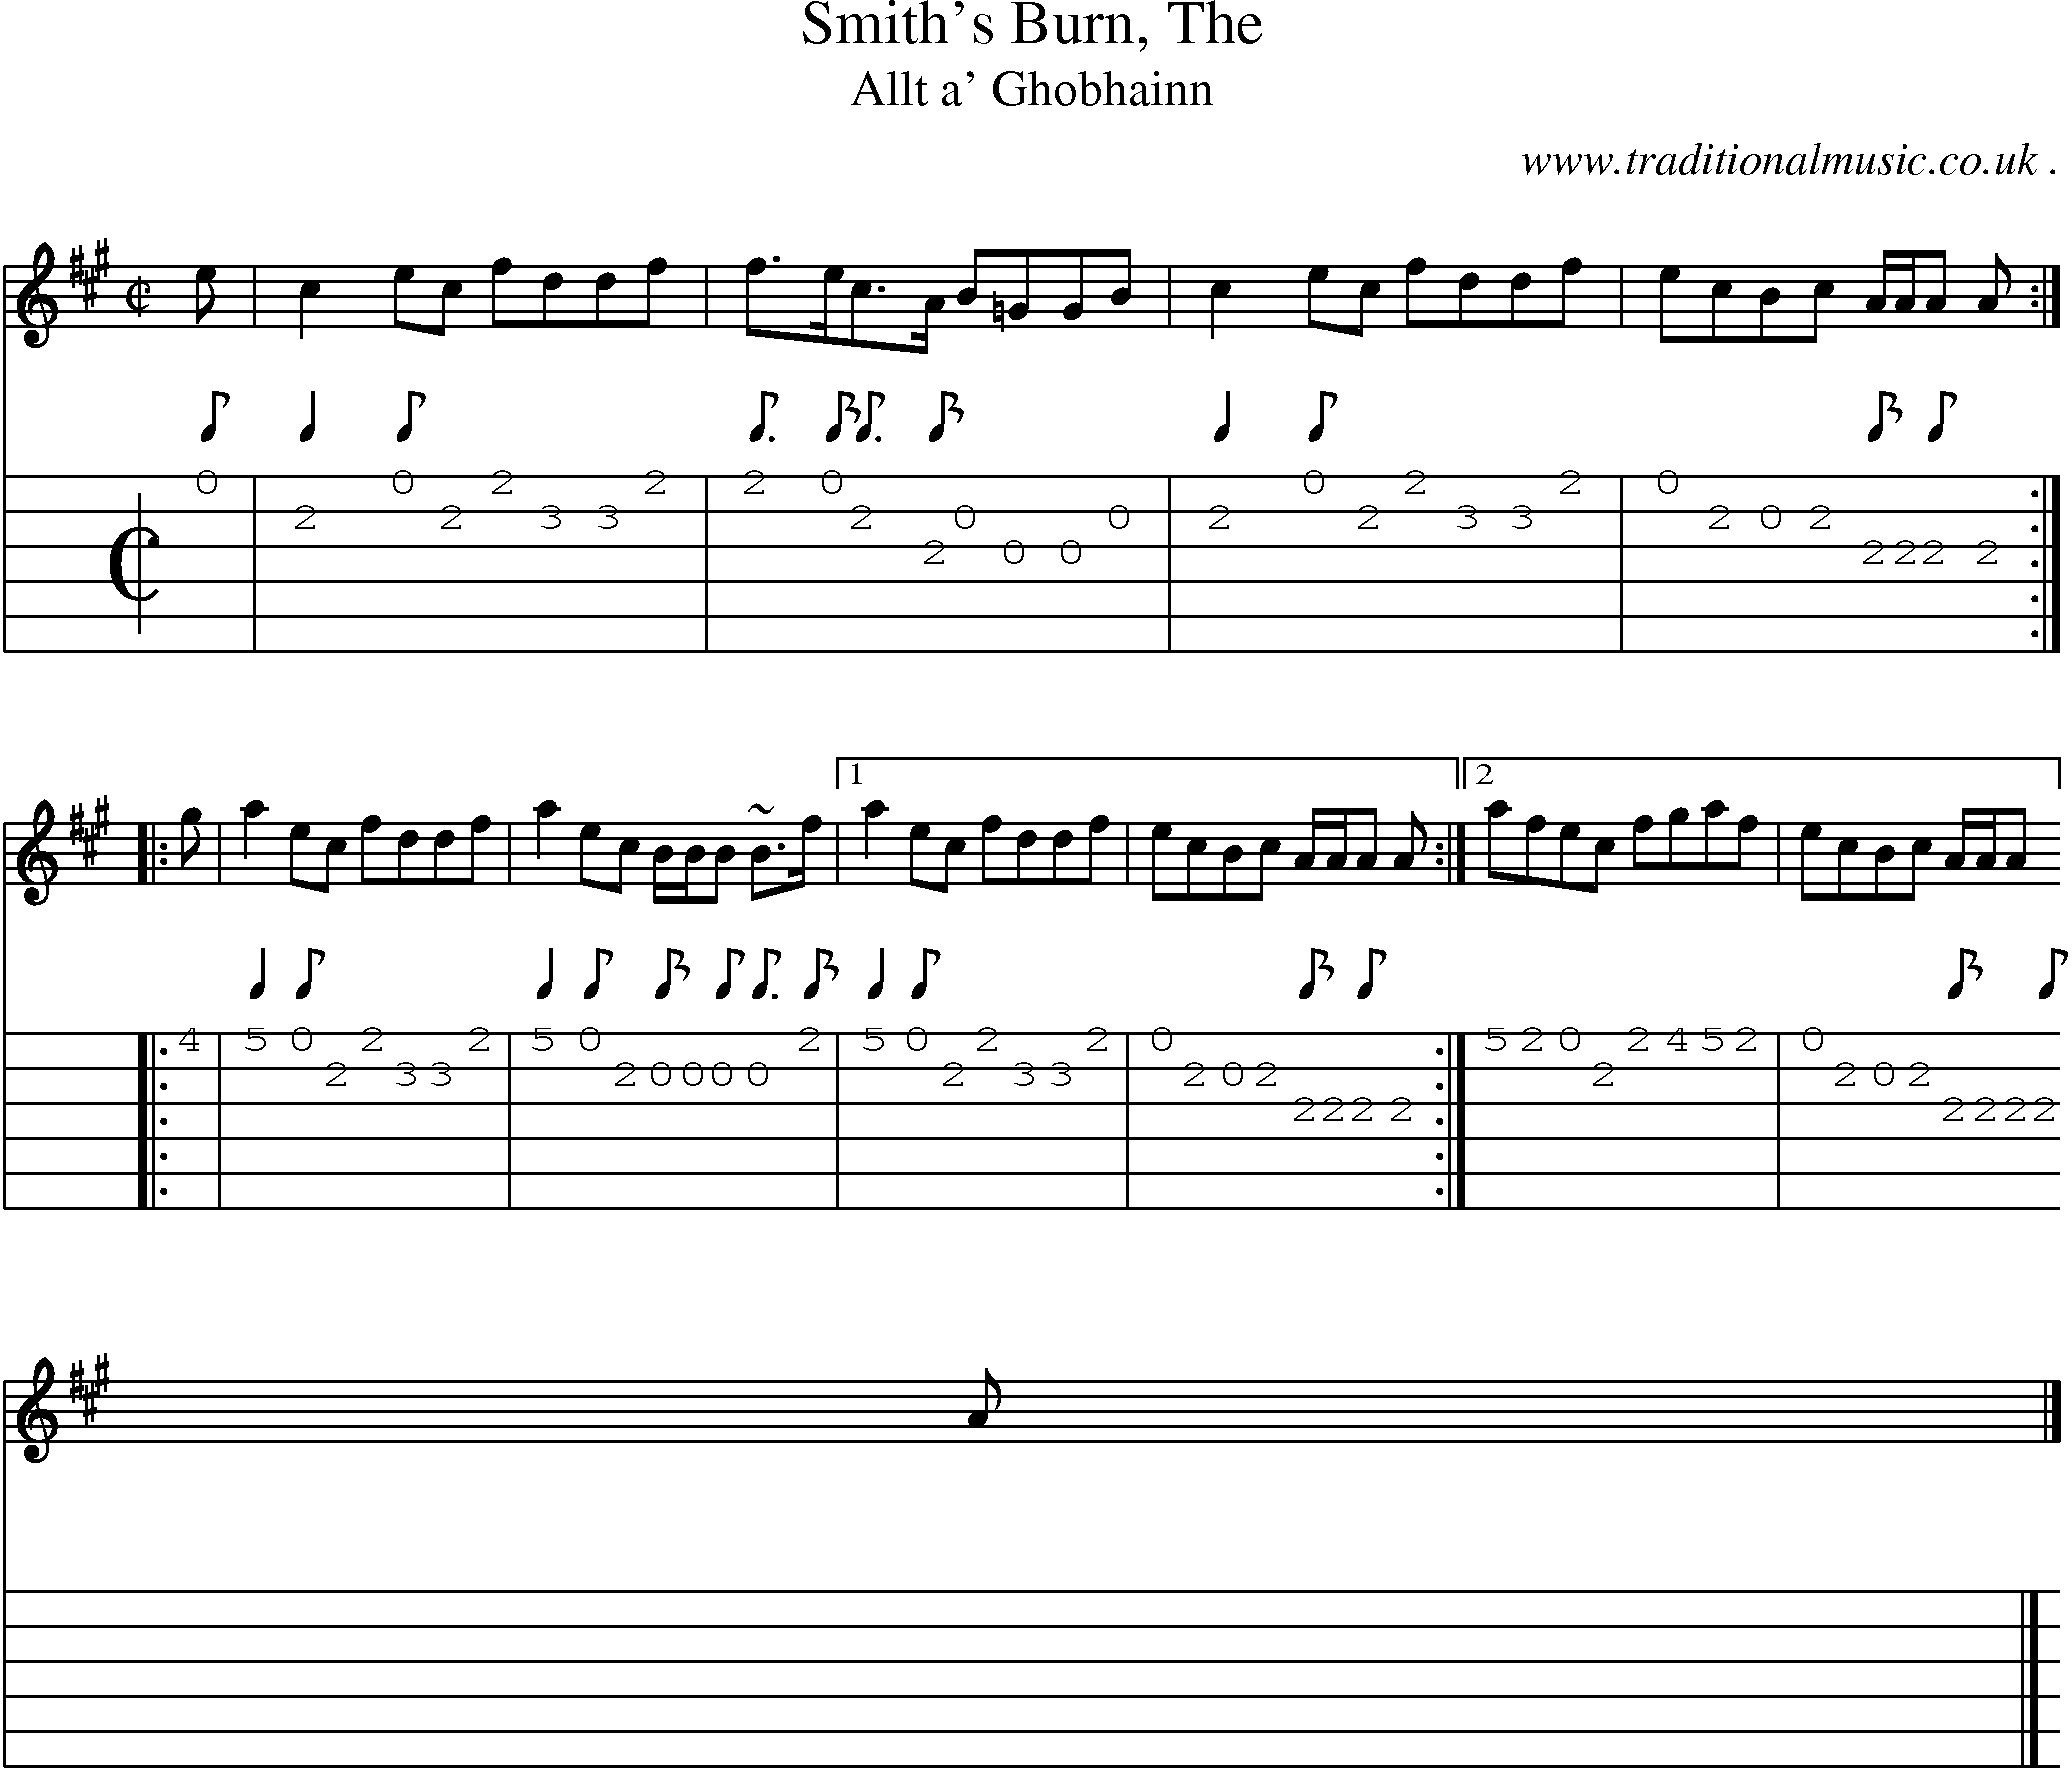 Sheet-music  score, Chords and Guitar Tabs for Smiths Burn The